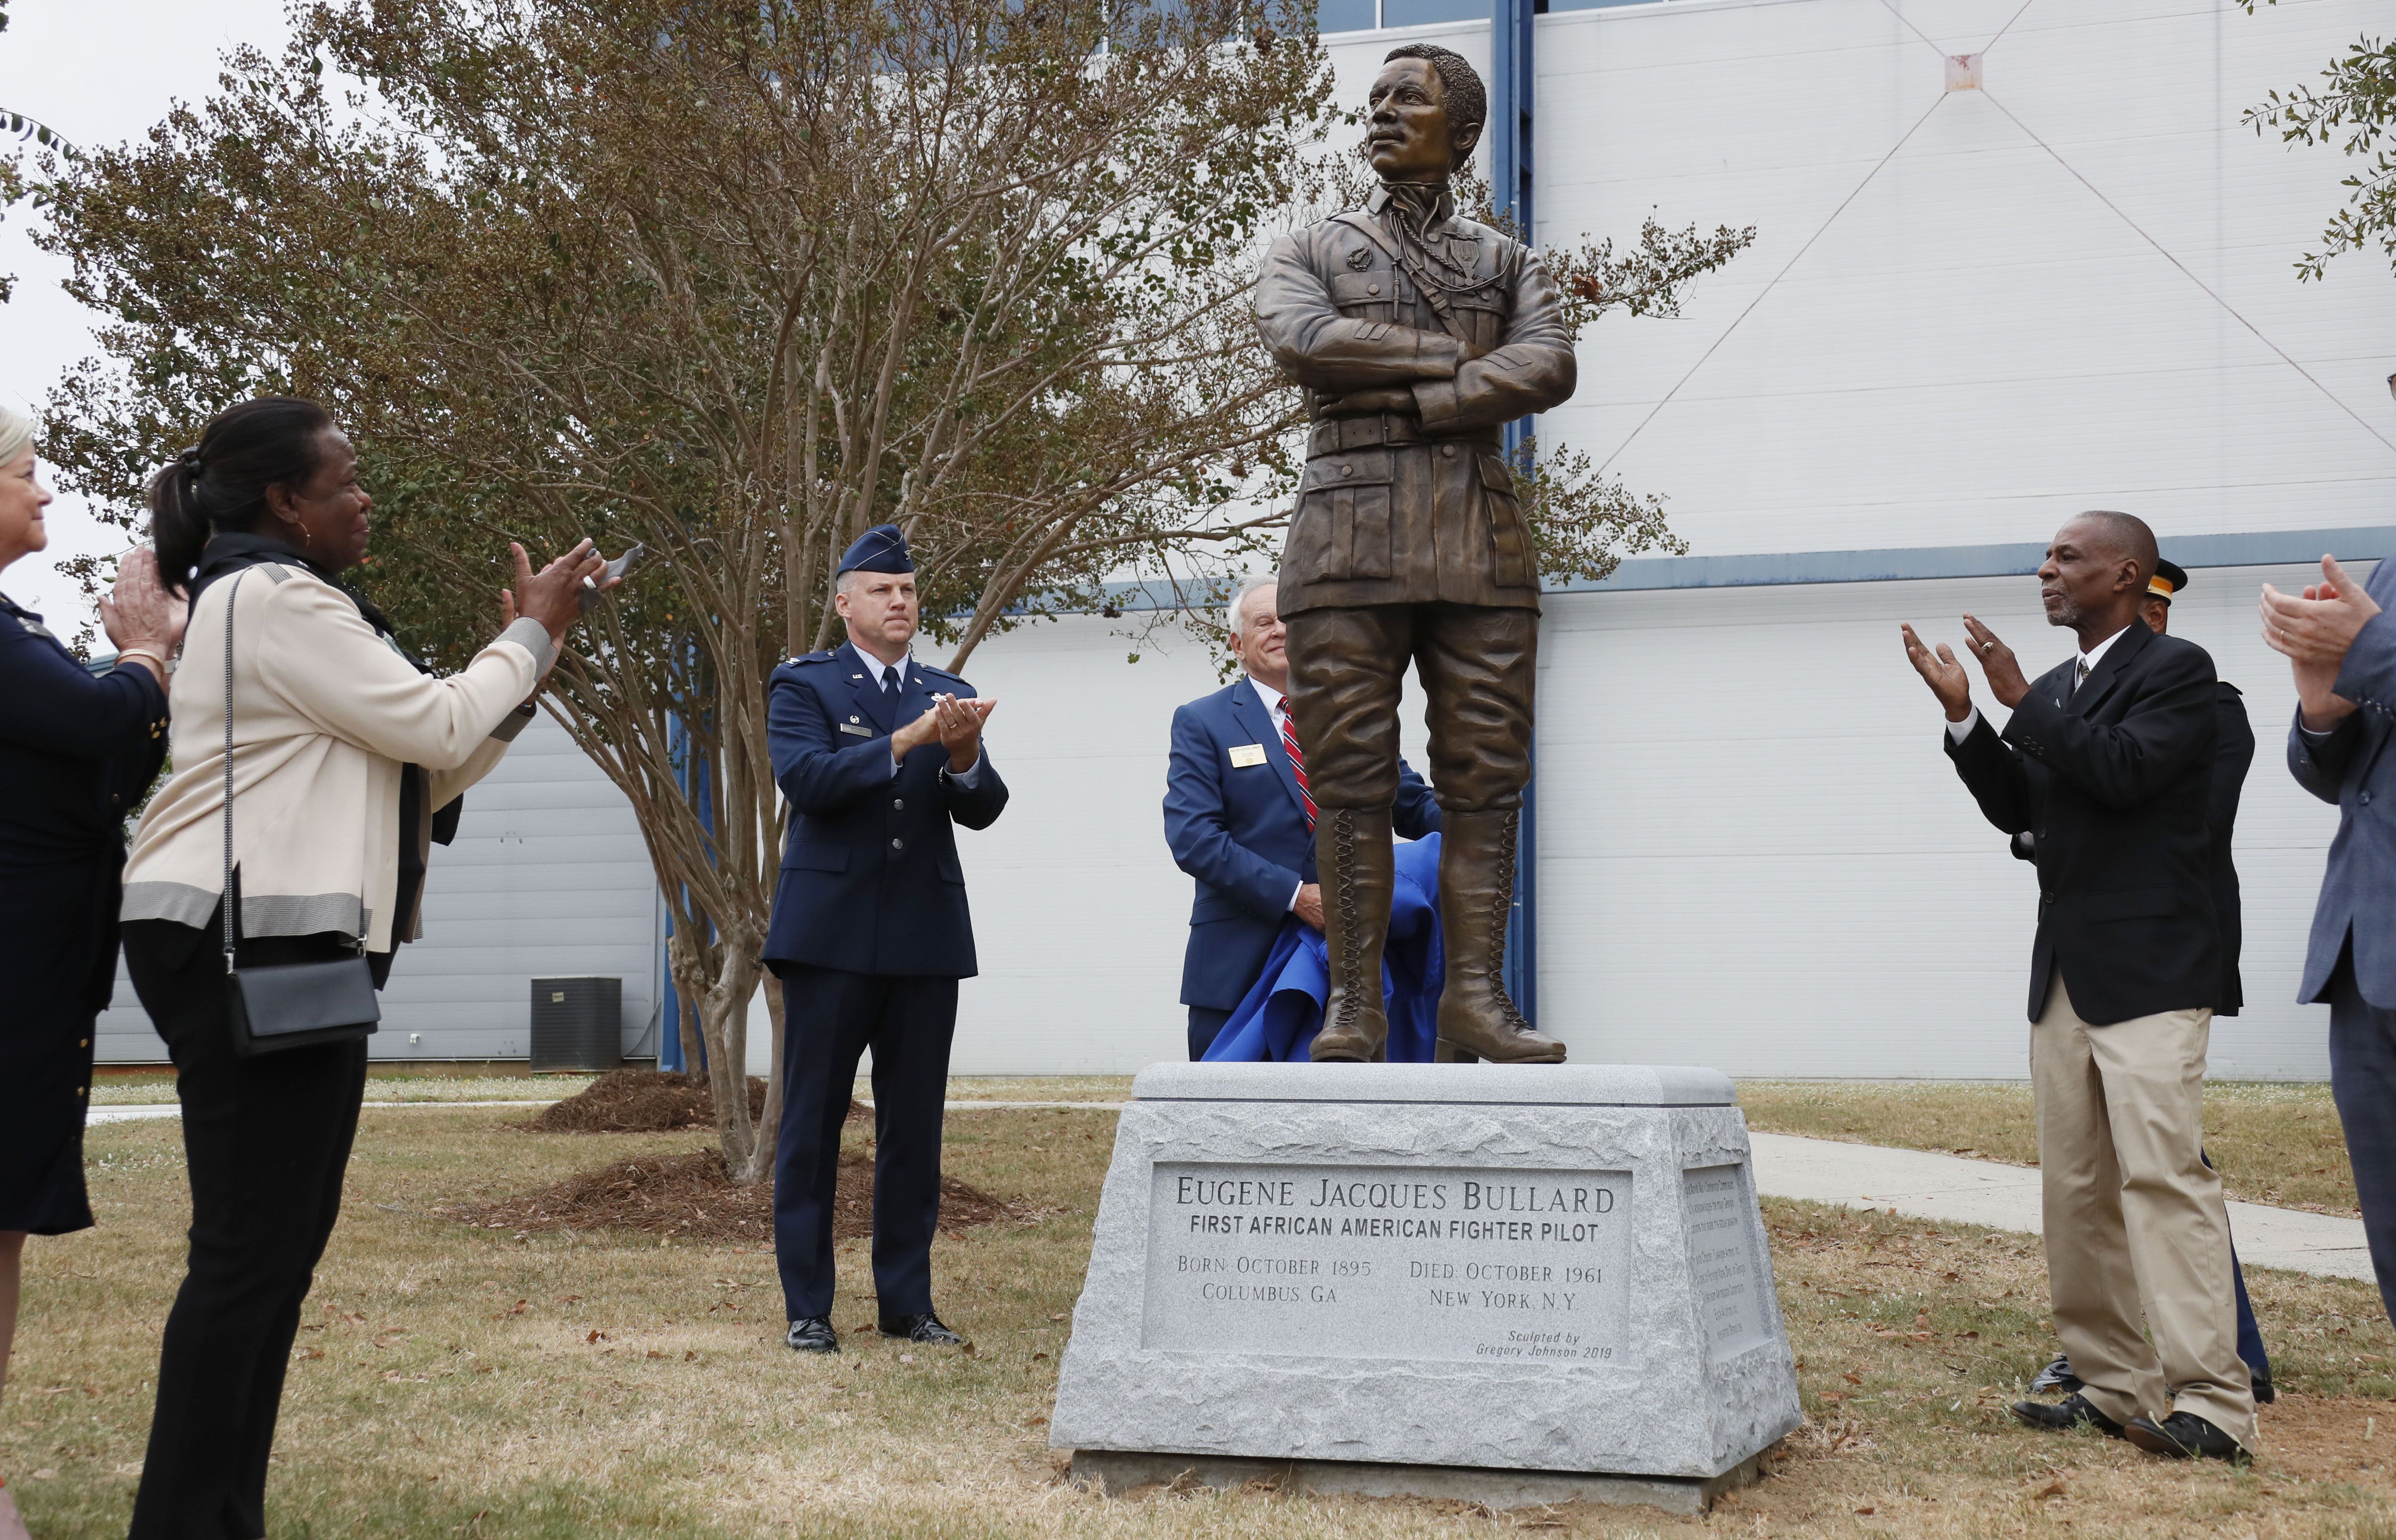 Aviation history is full of black pilot heroes, if only we would their